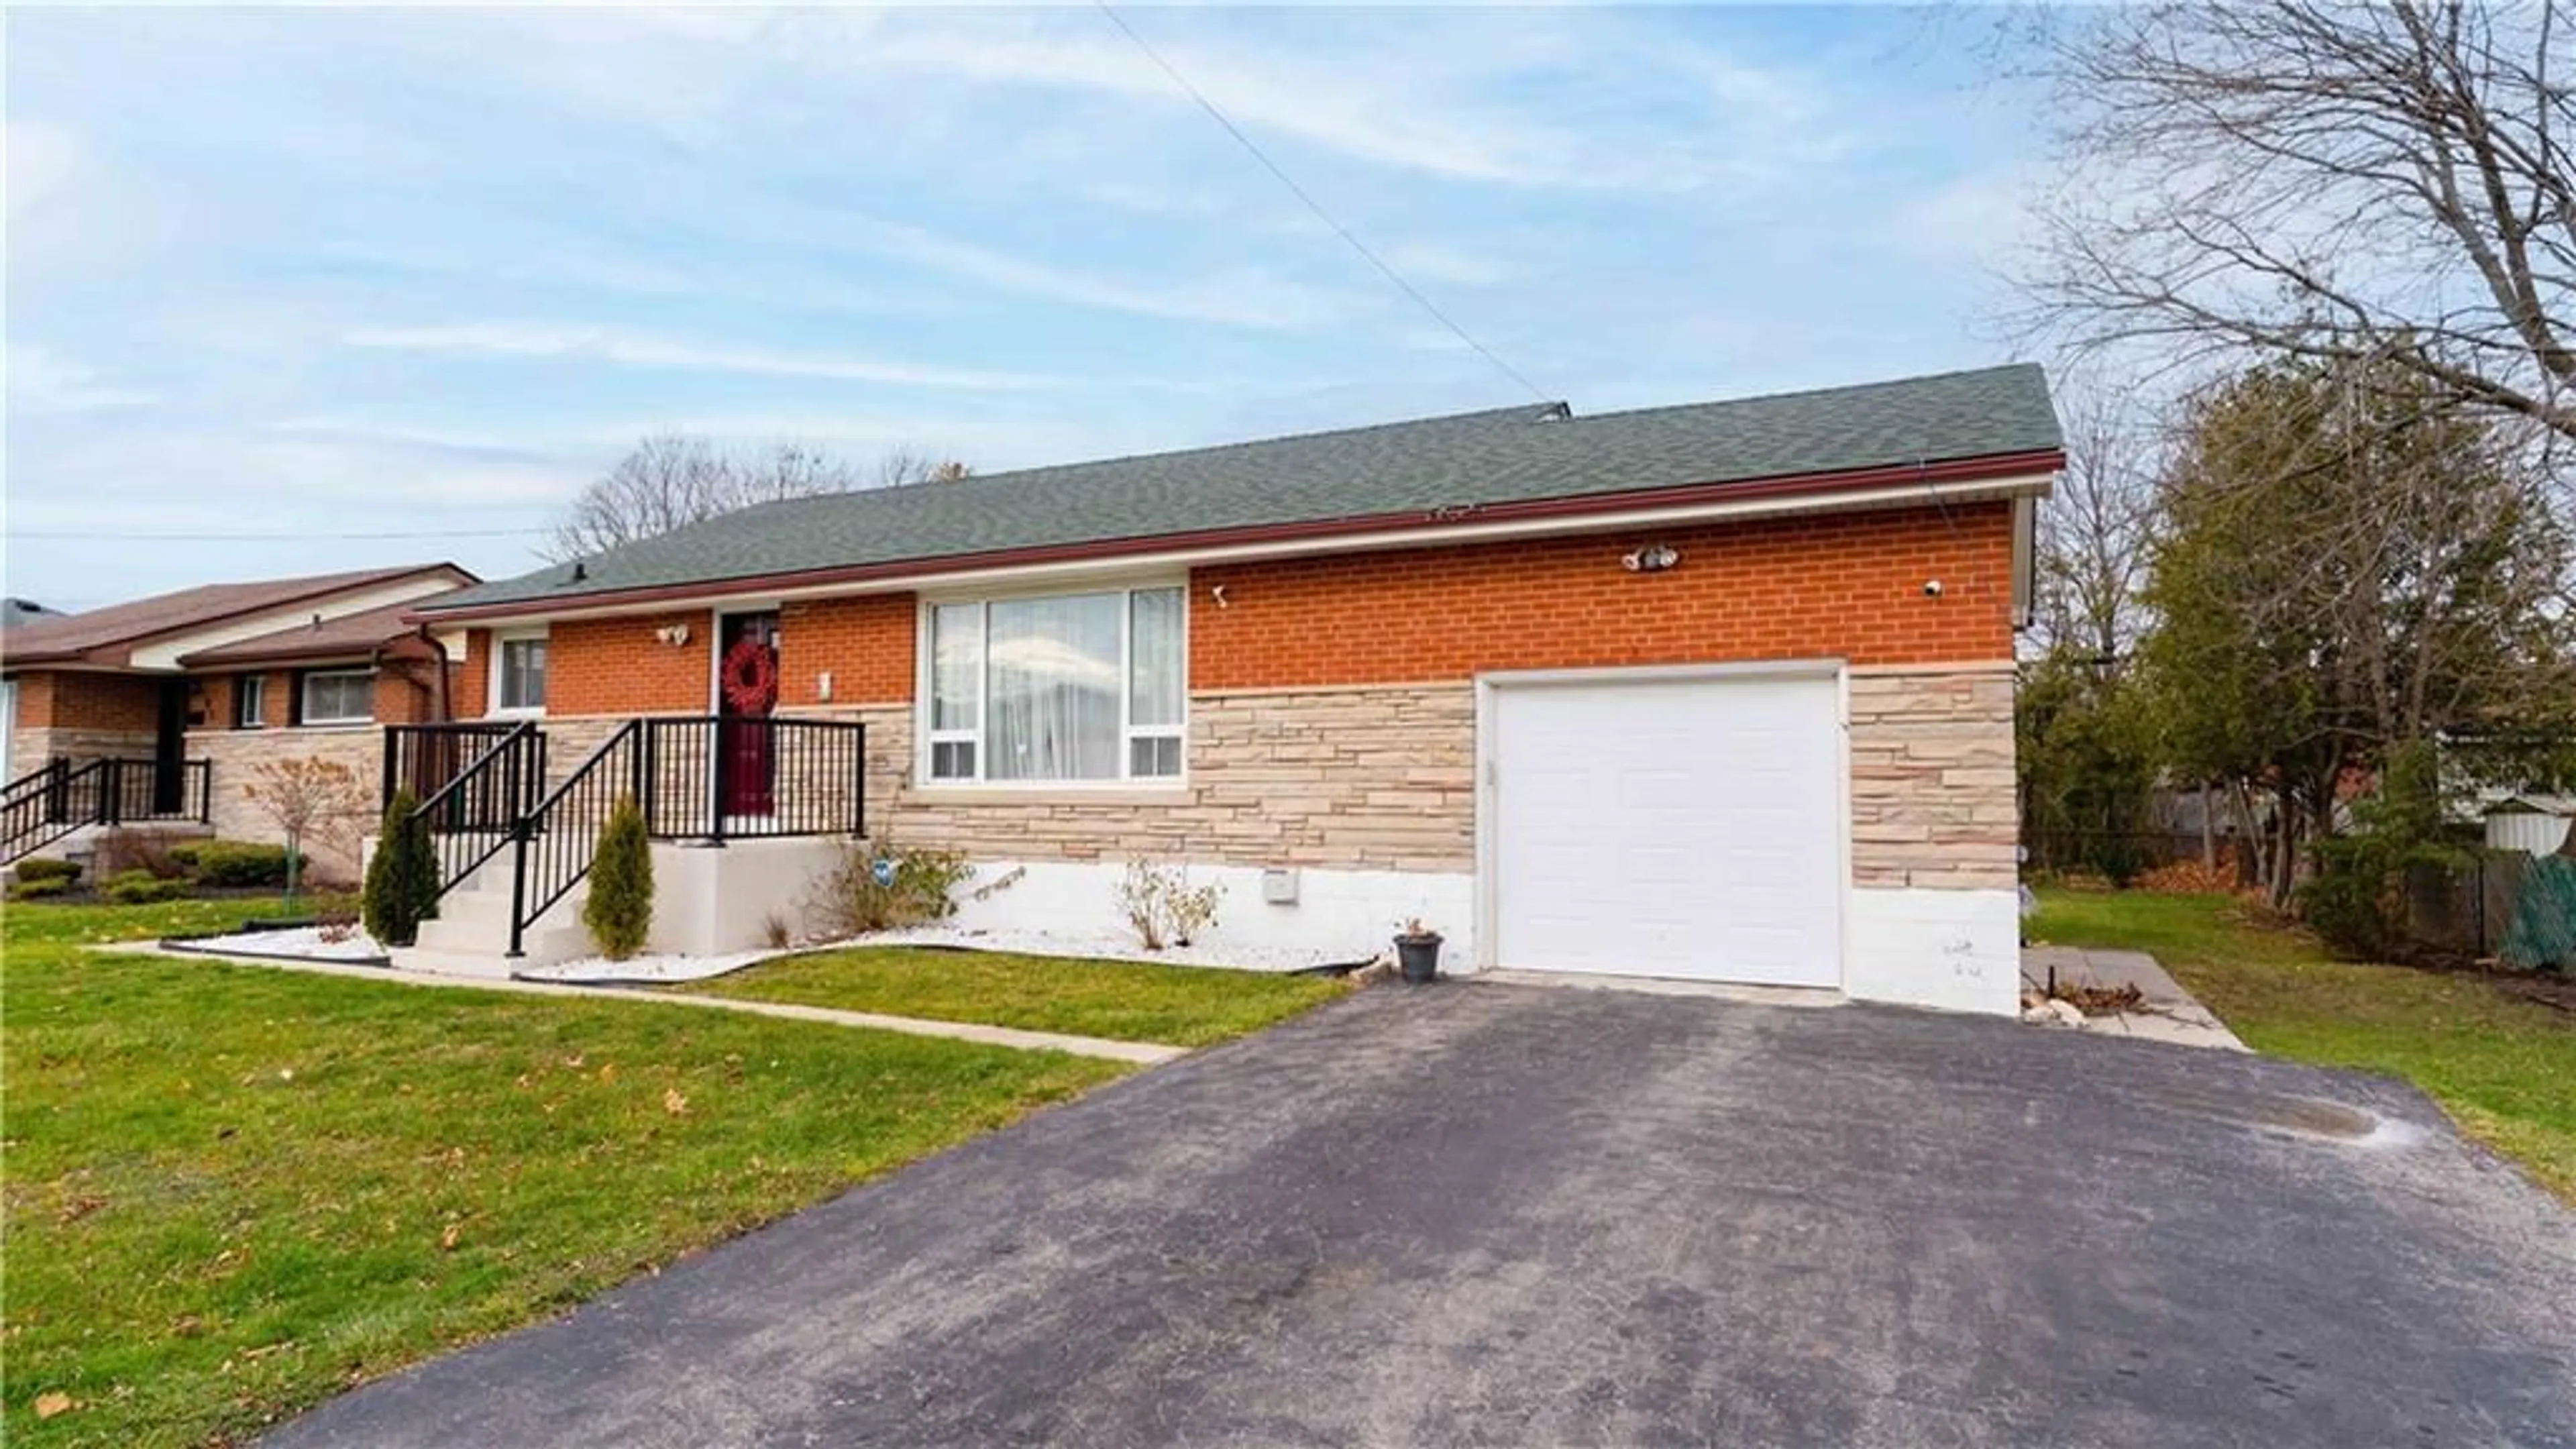 Home with brick exterior material for 189 TOBY Cres, Hamilton Ontario L8T 2P1